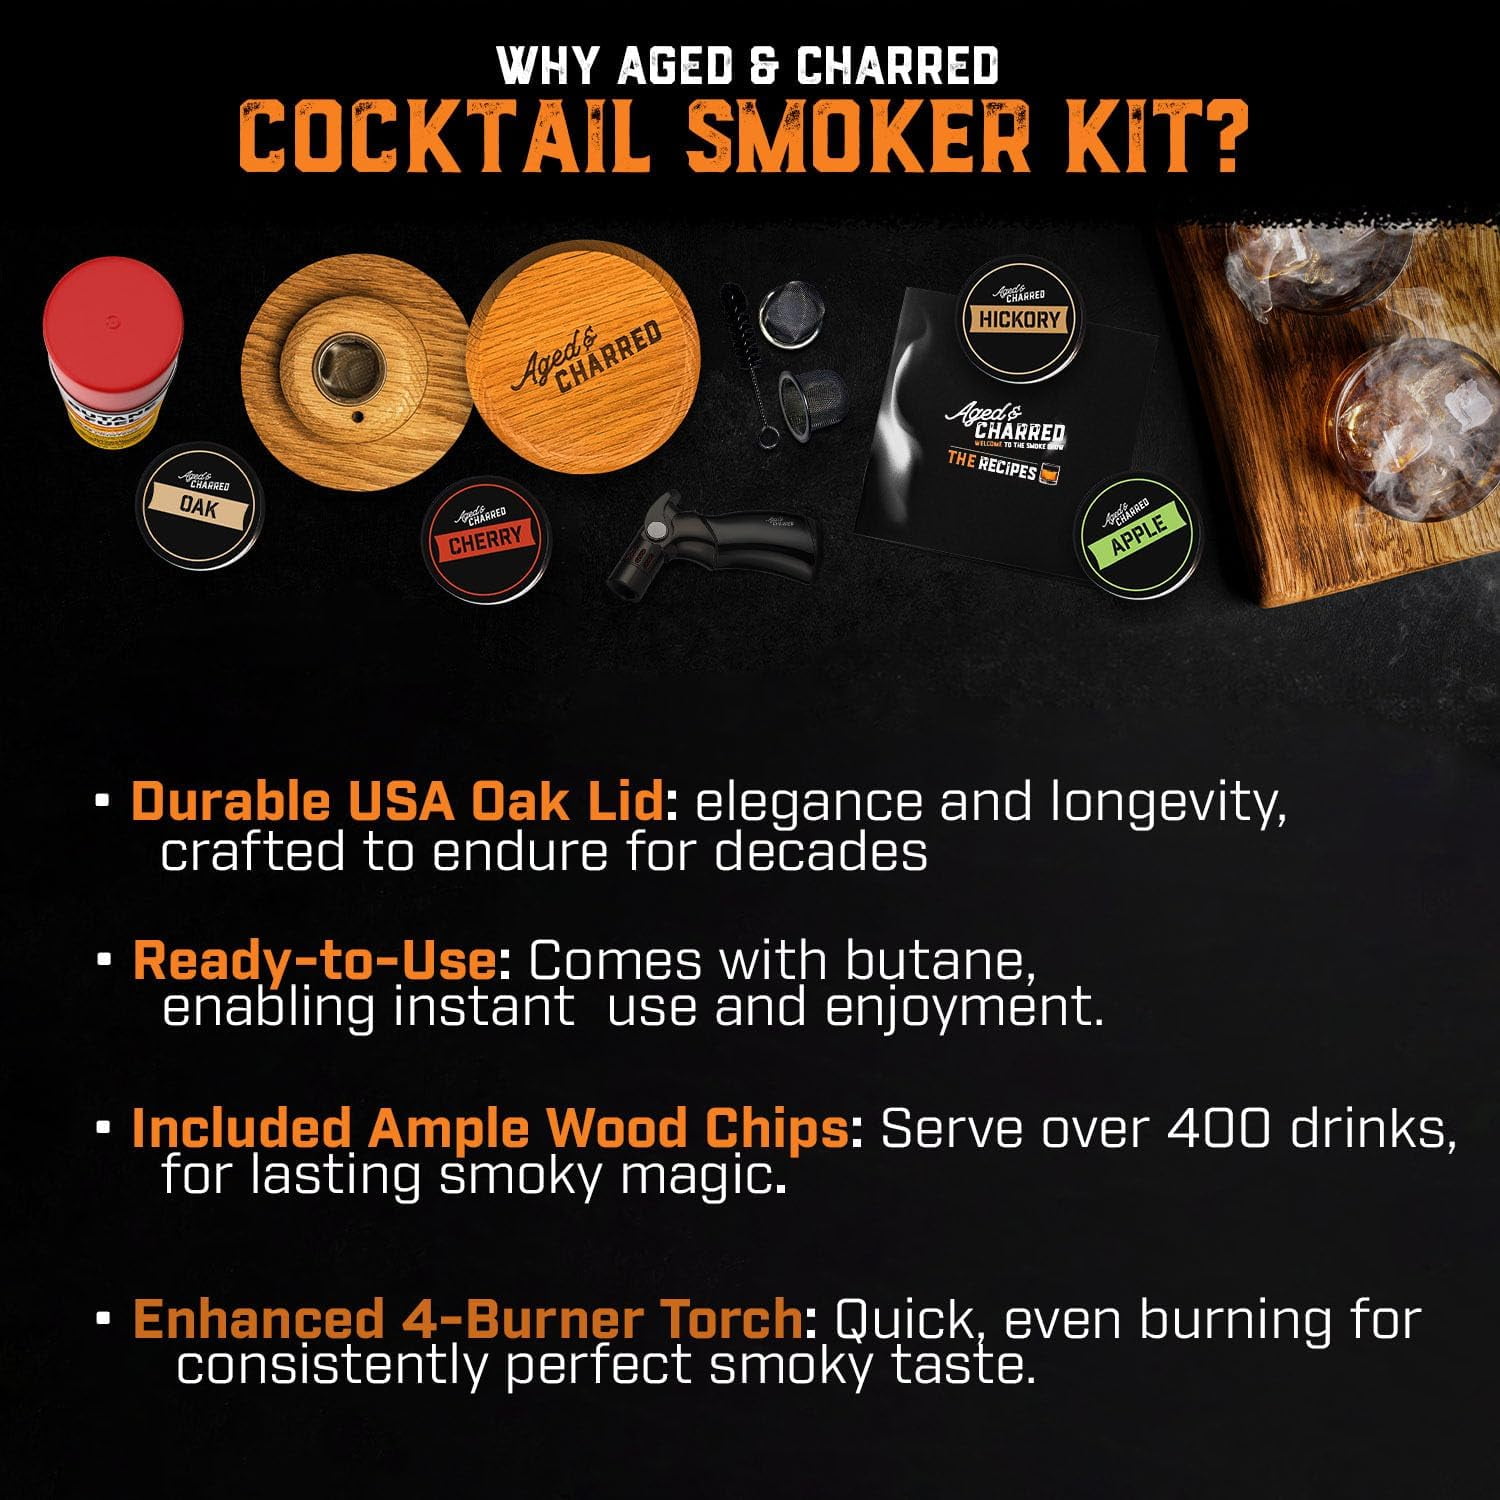  Cocktail Smoker Kit with Butane Torch Old Fashioned Cold  Smoker for Cocktail, Whiskey, Wine, Bourbon , Cheese, Meat and More,  Cocktail Smoking Kit Wood Shavings : Patio, Lawn & Garden